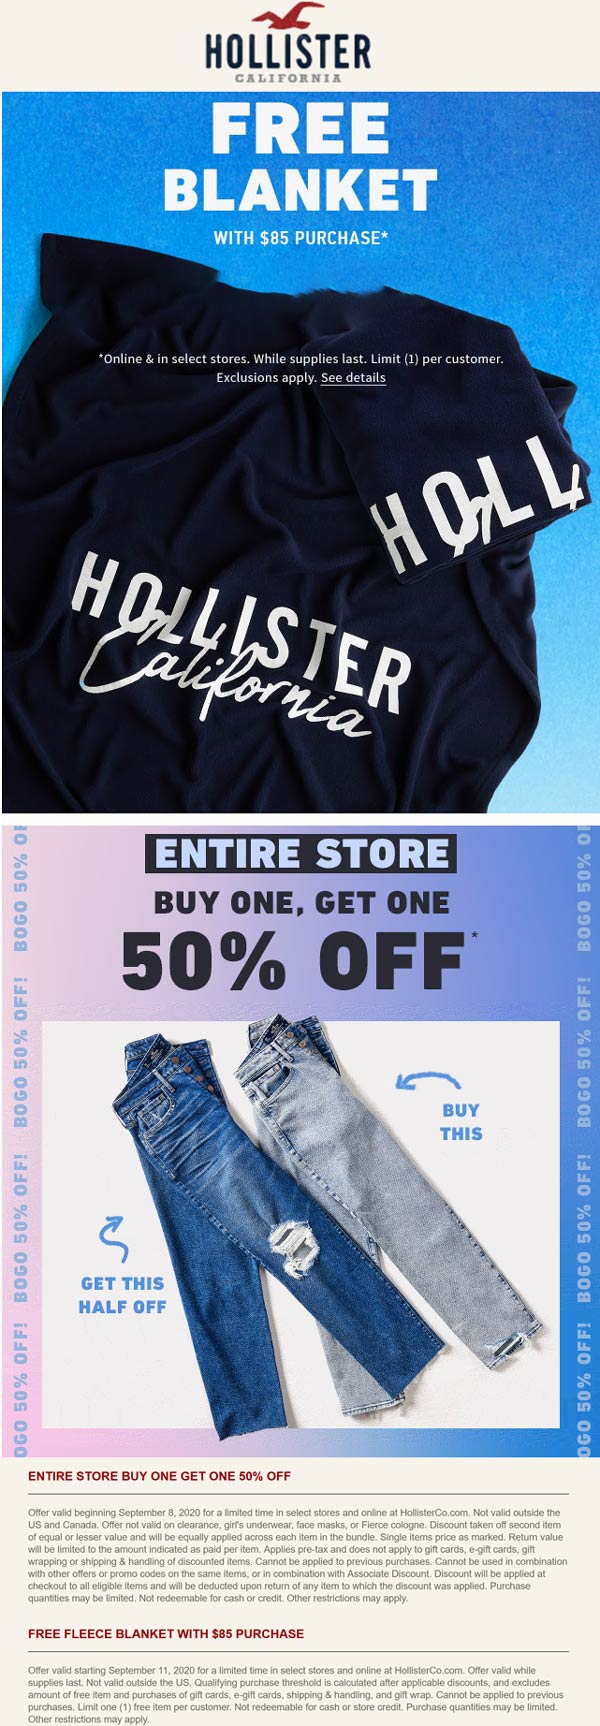 Hollister stores Coupon  Free blanket on $85 + second item 50% off at Hollister #hollister 